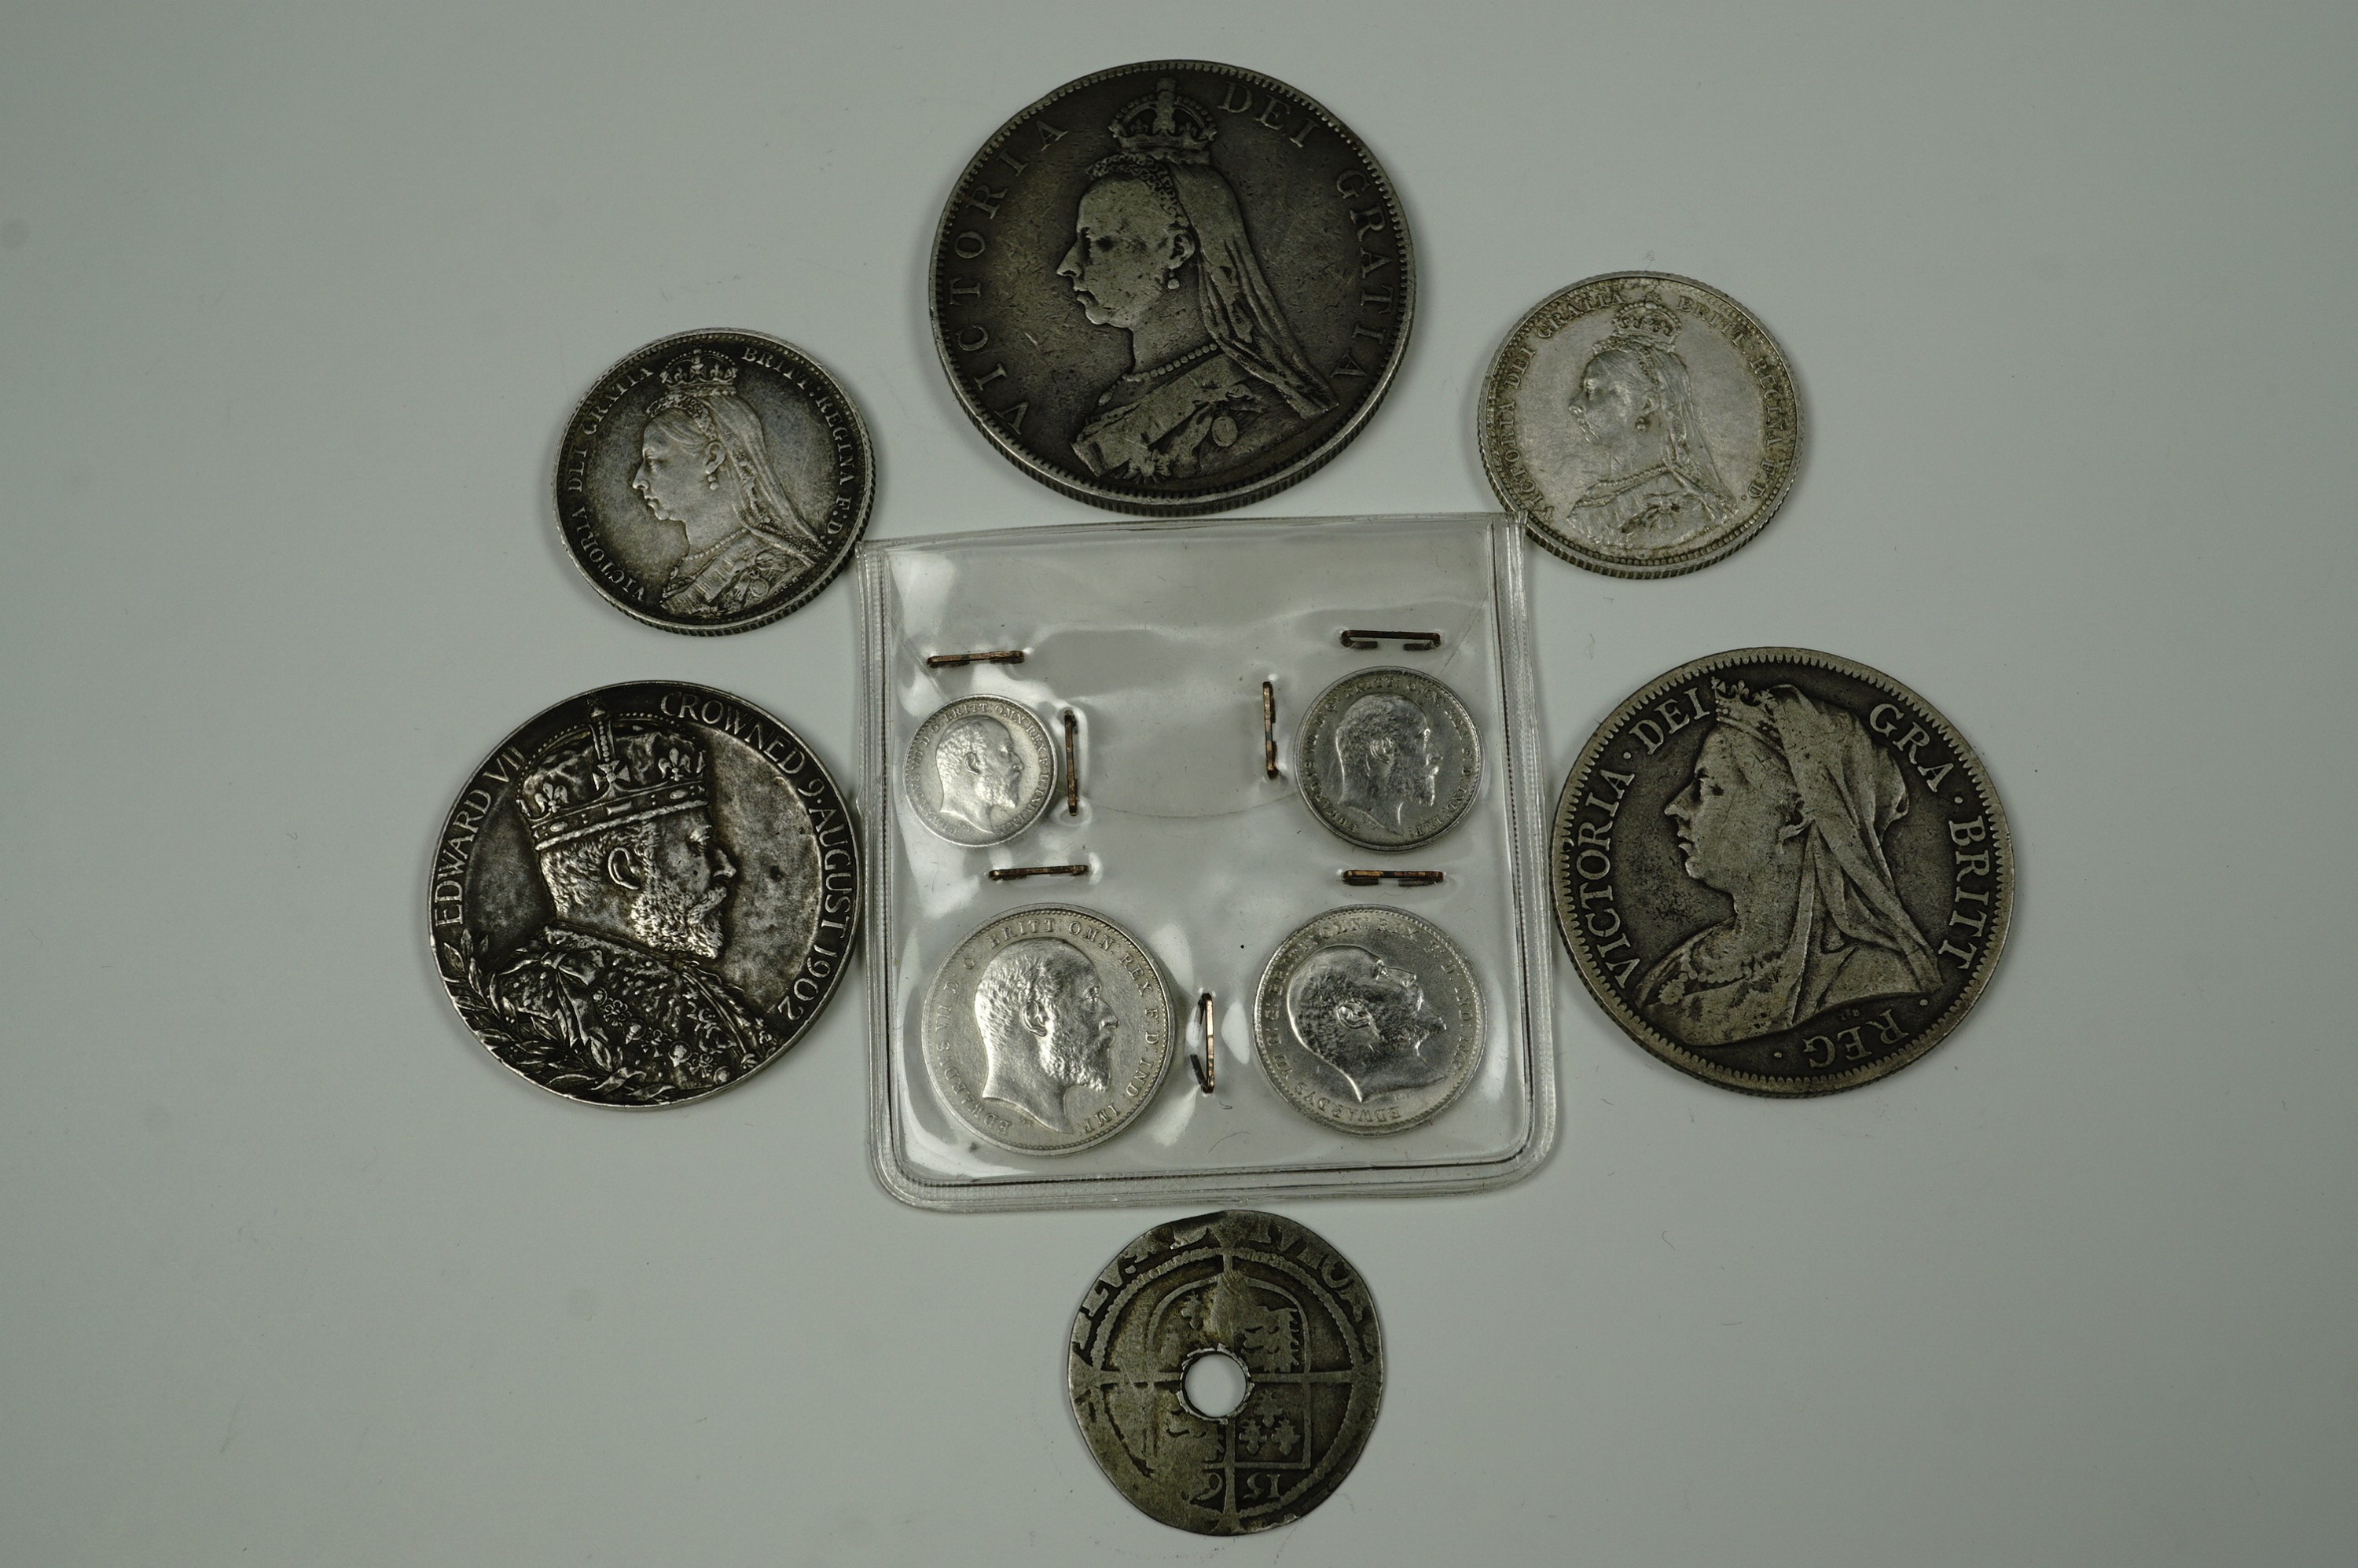 A 1902 Maundy set together with a 1902 coronation commemorative, sundry Victorian silver coins and